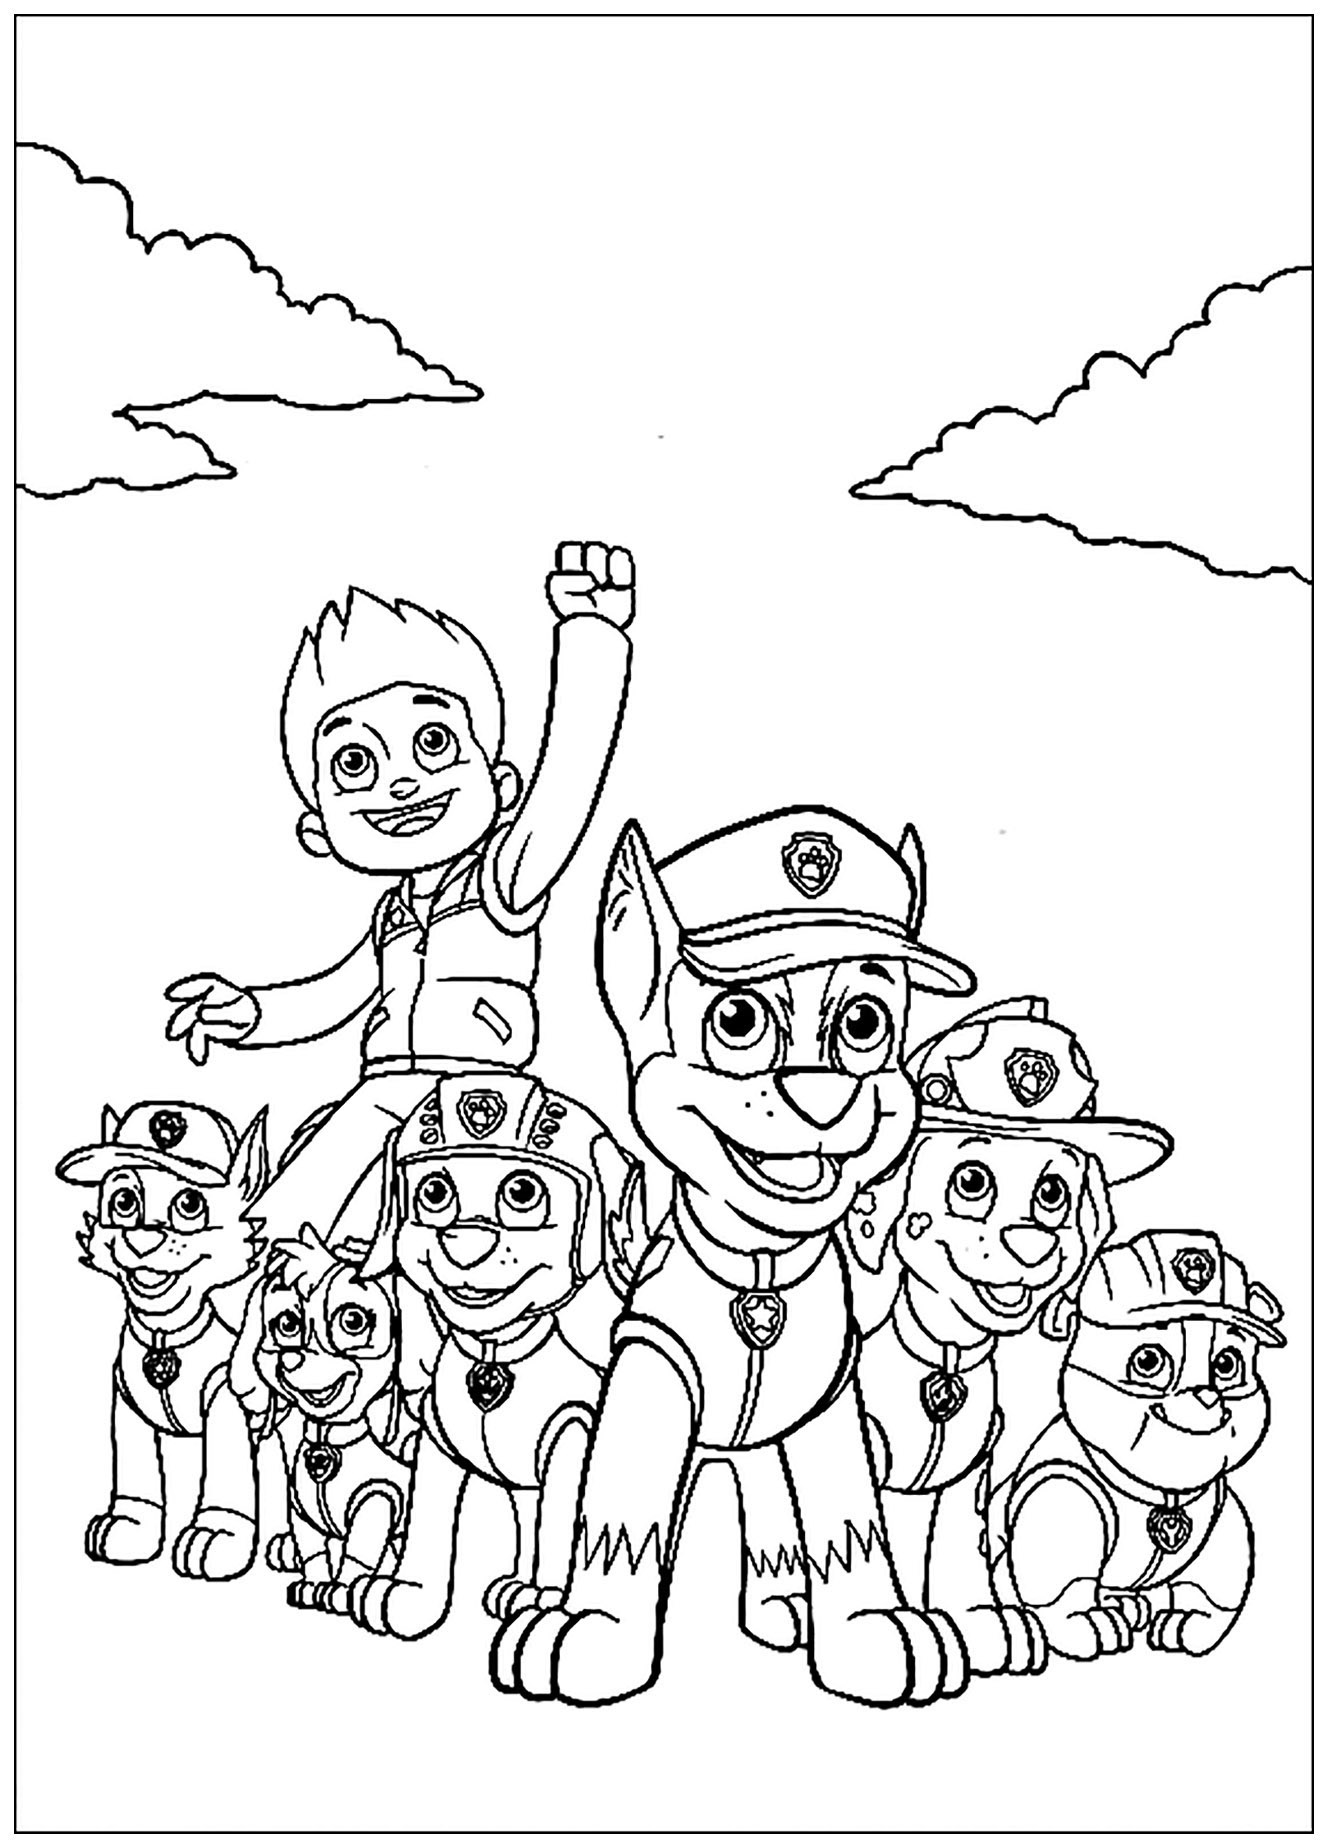 Paw Patrol Coloring Pages FREE Printable 28